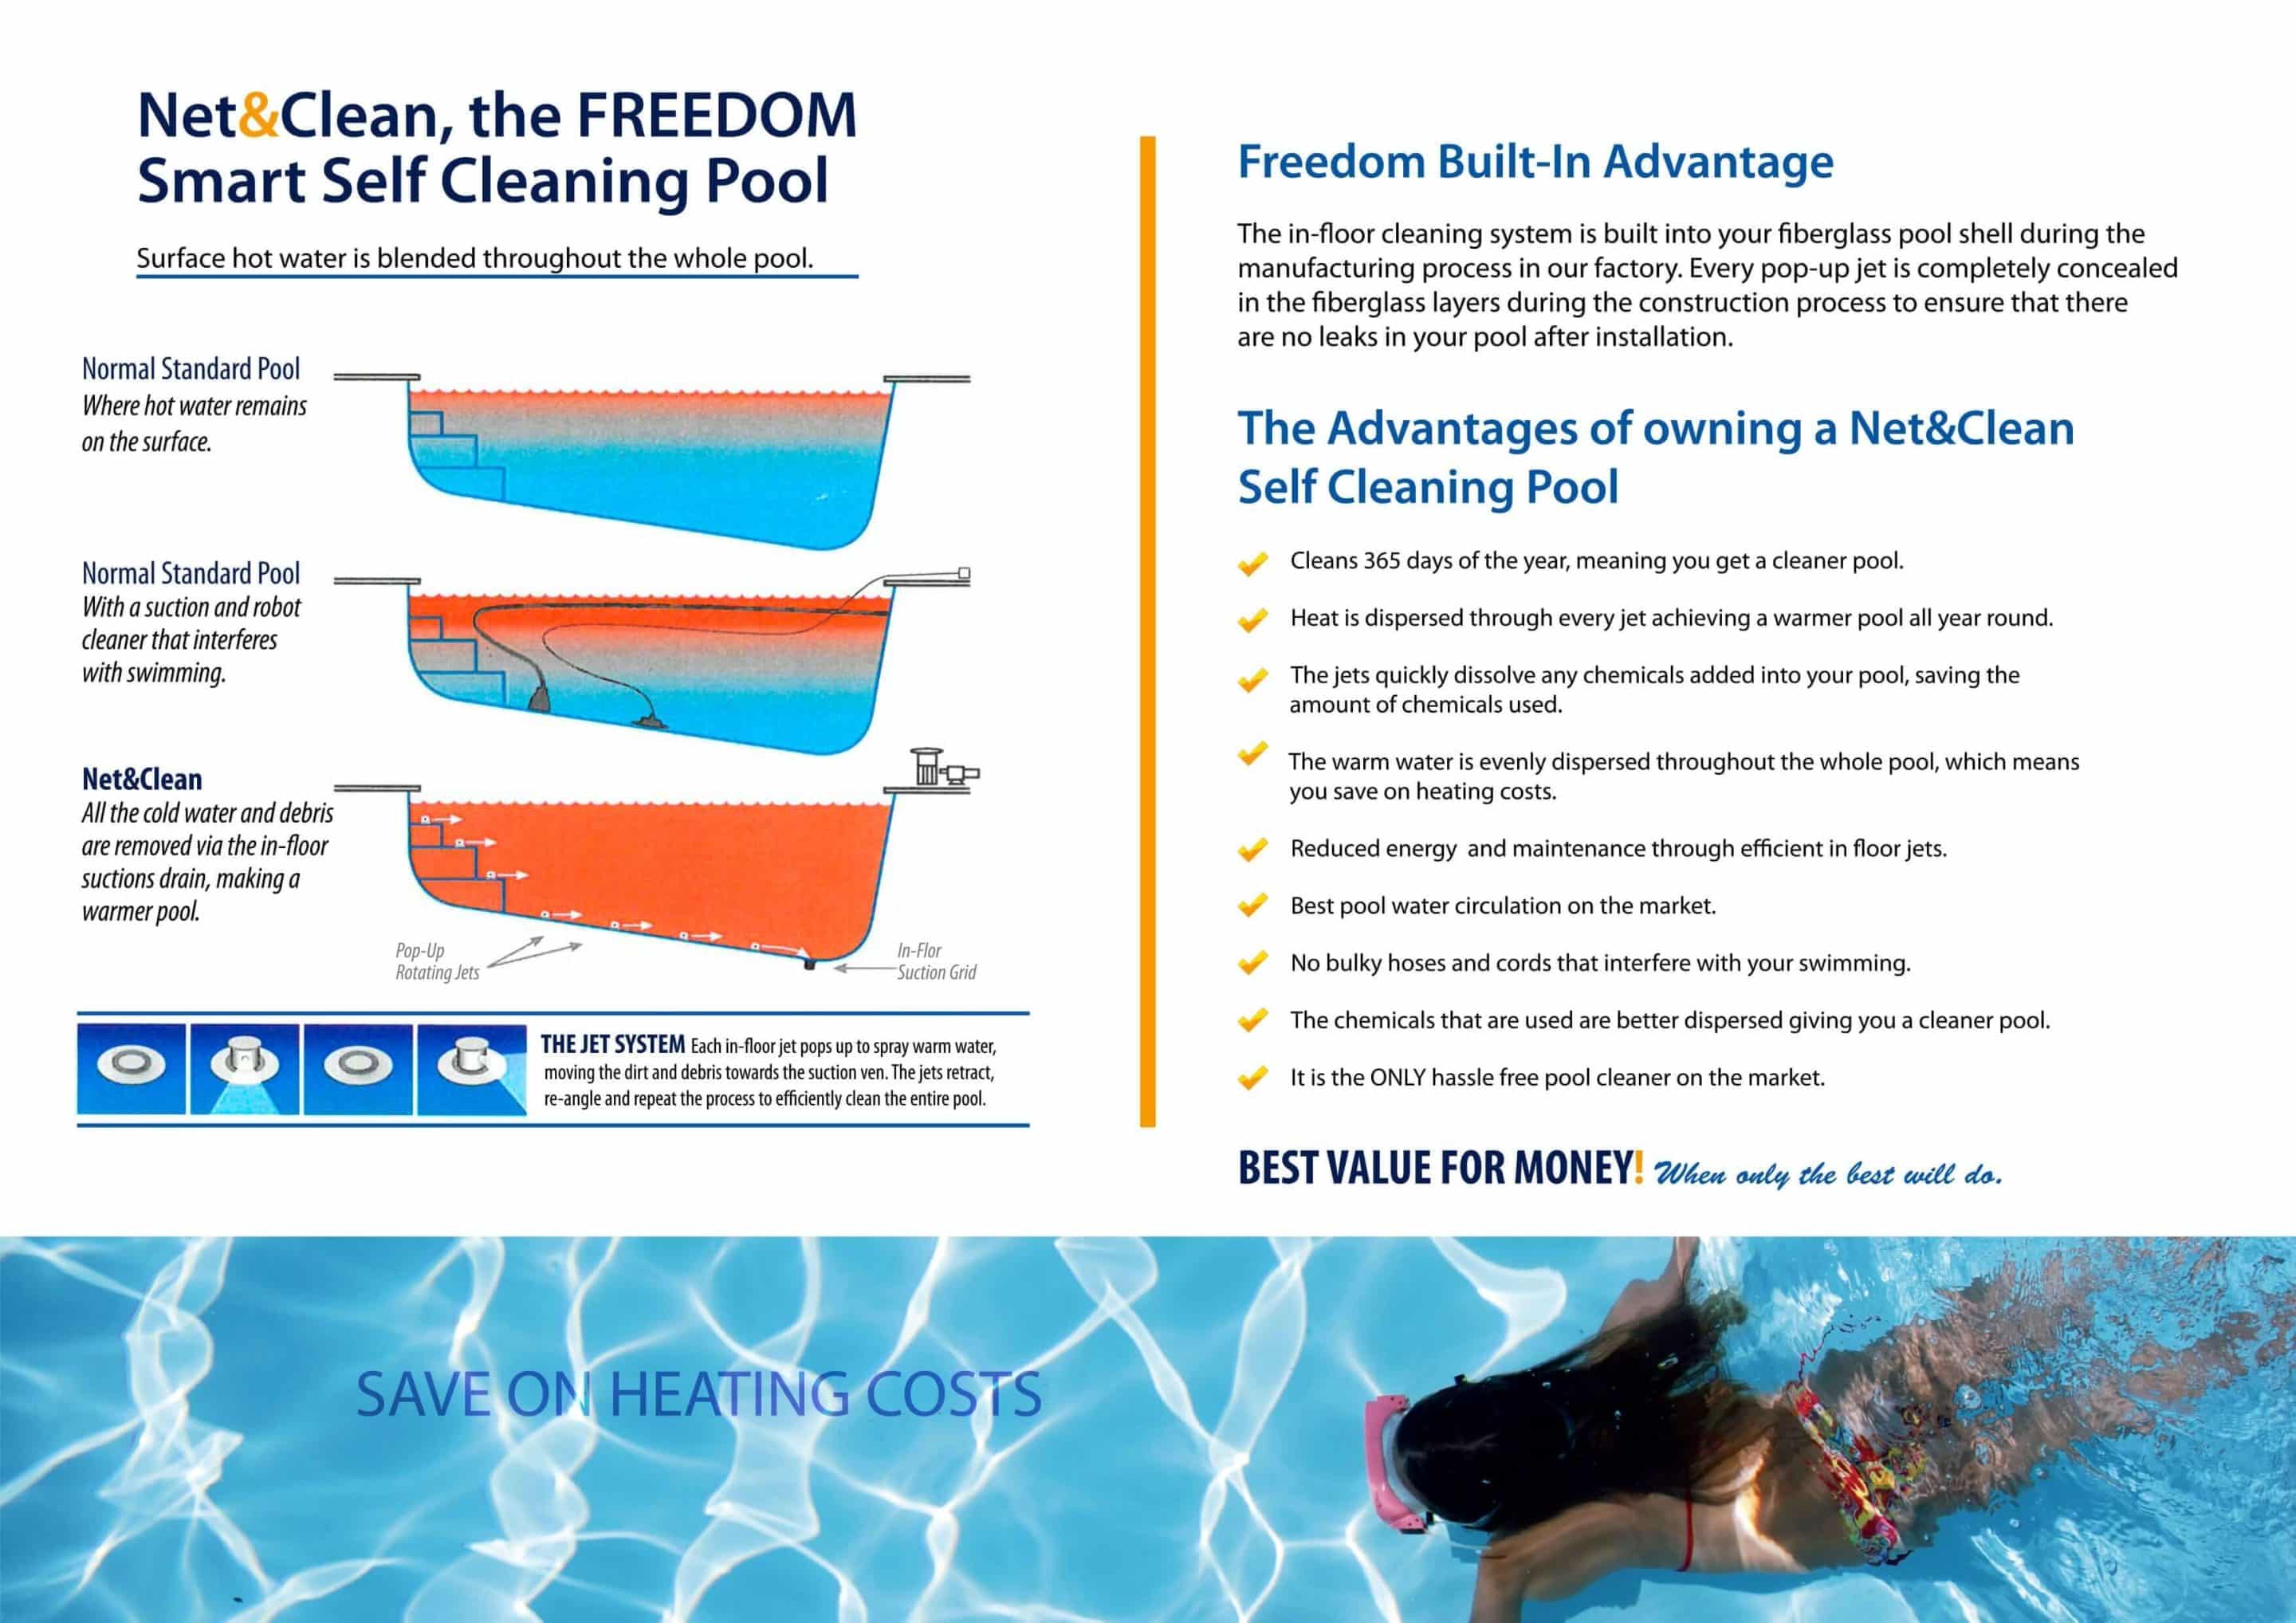 Self-cleaning of swimming pools